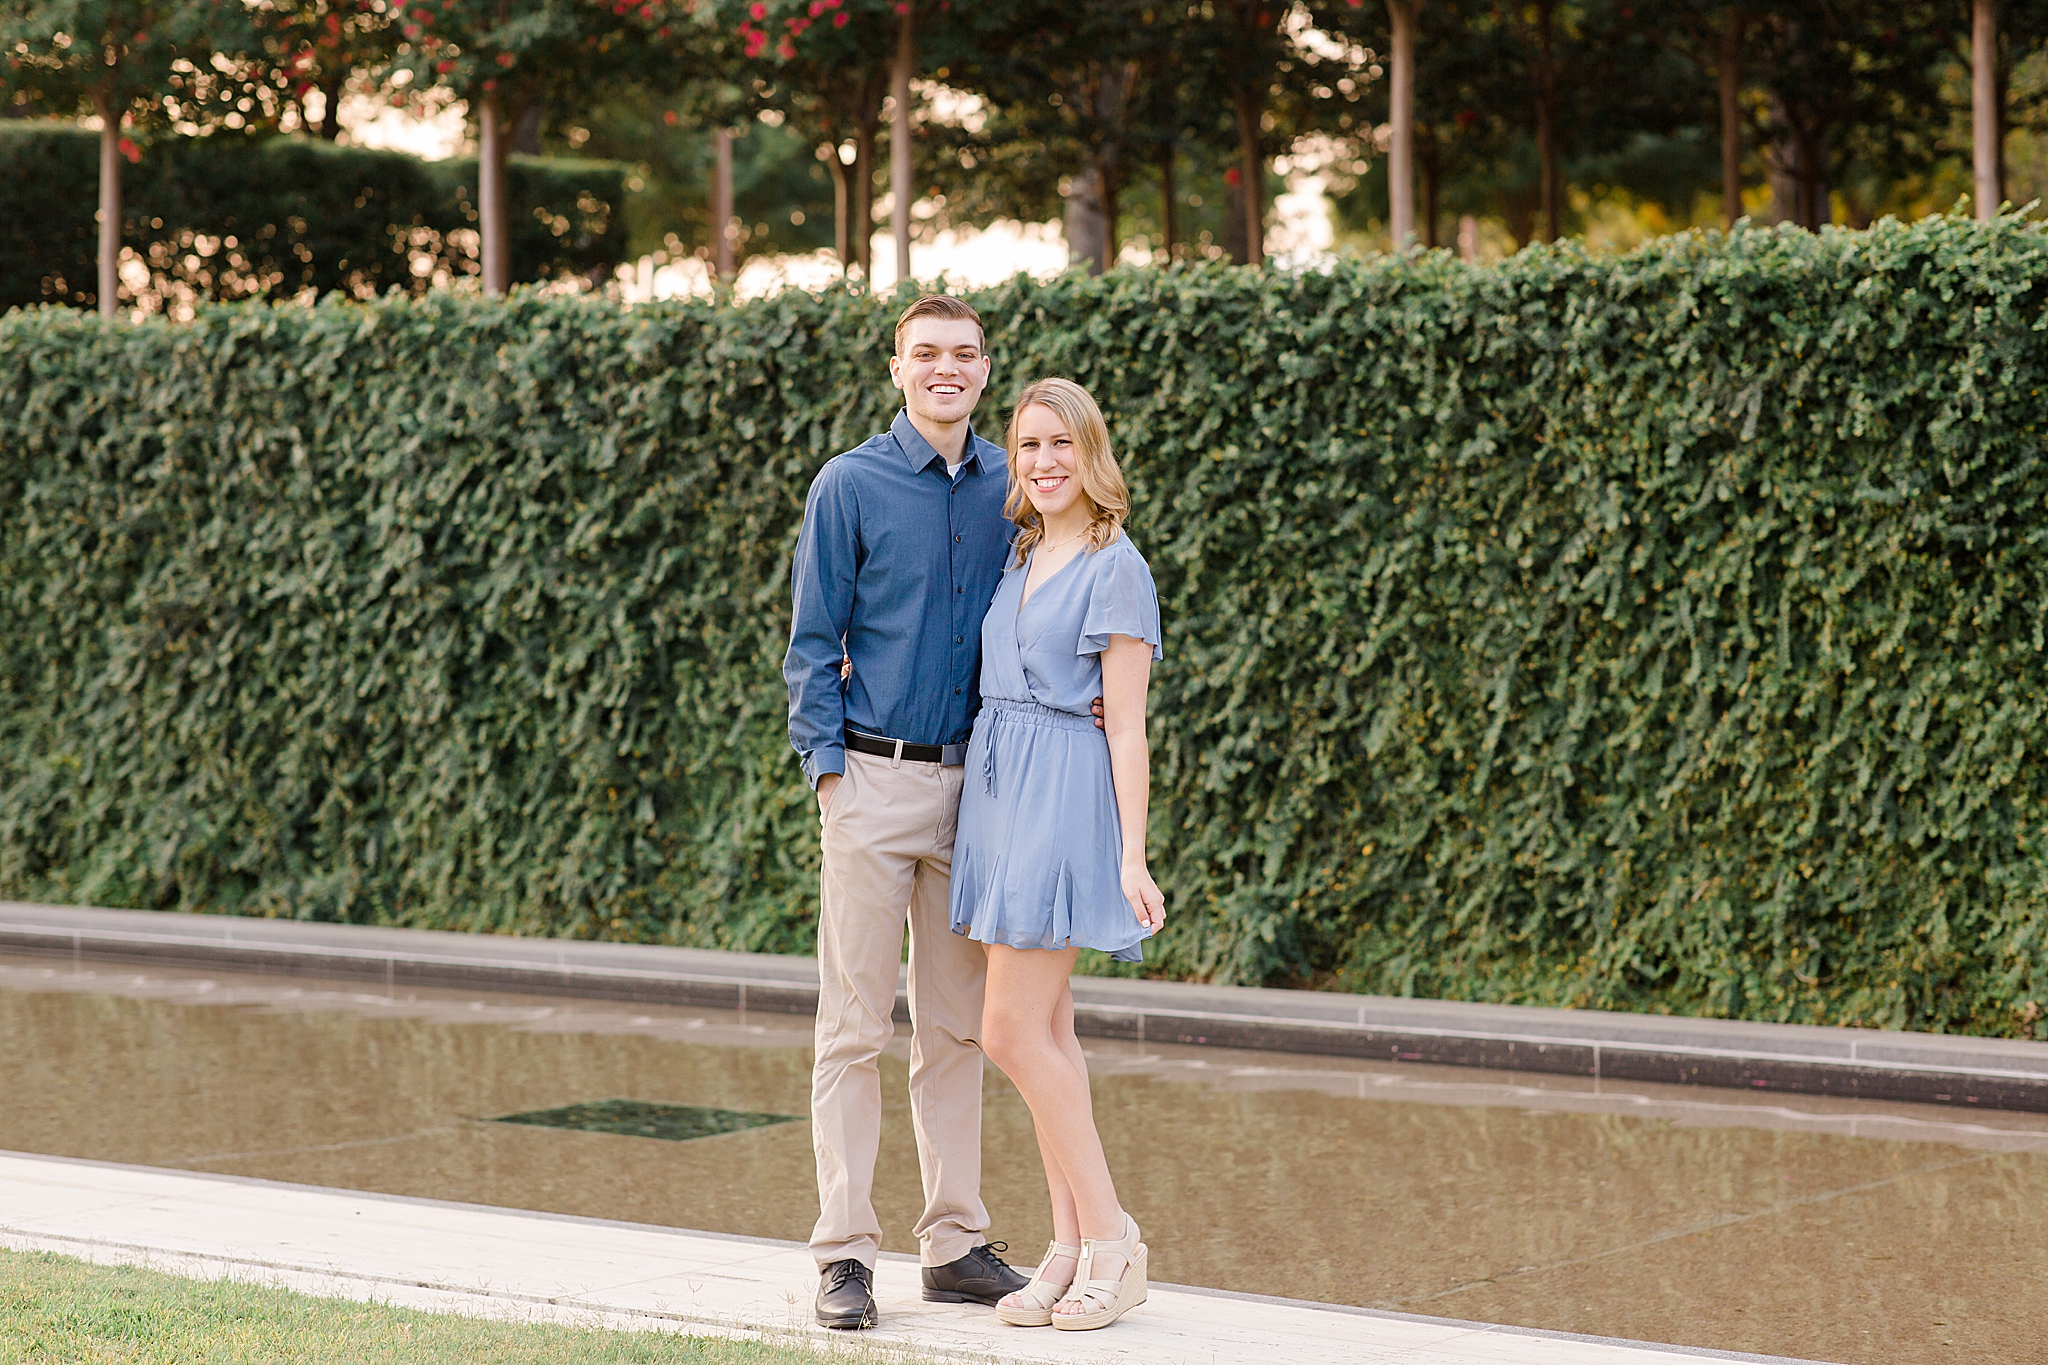 Fort Worth engagement photos near ivy wall